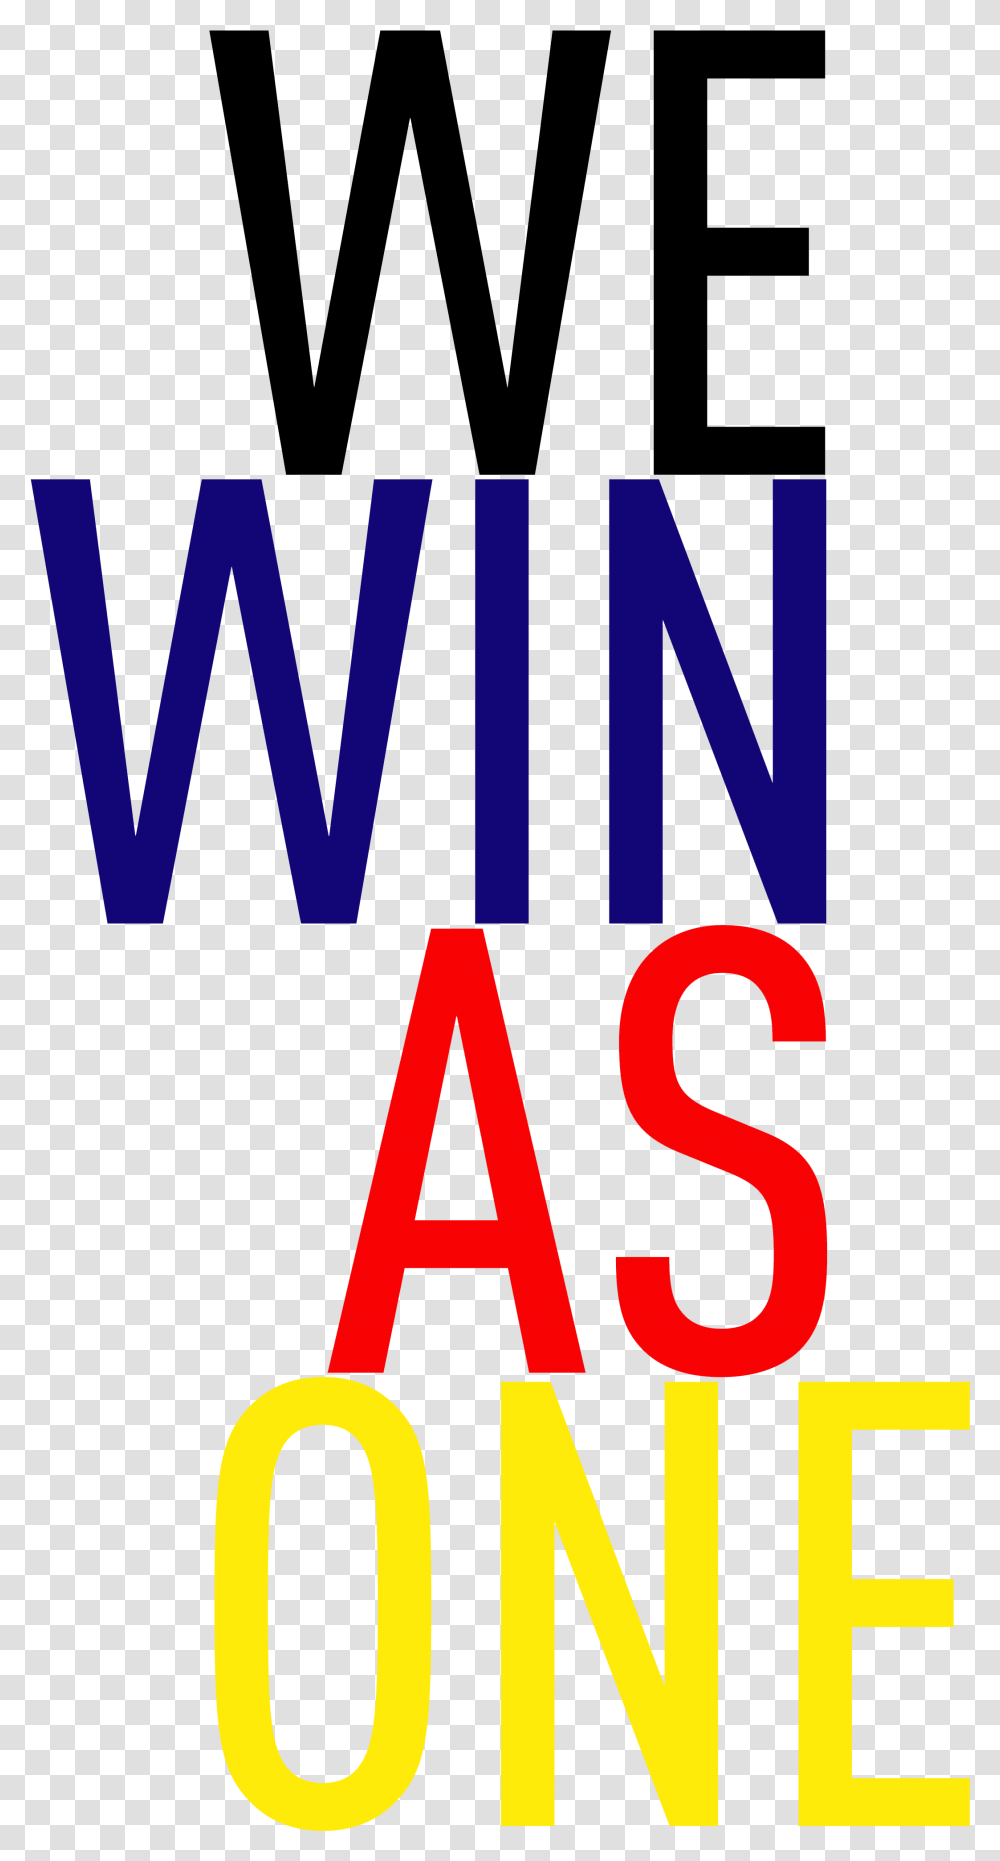 We Win As One 2019 Sea Games Motto Graphic Design, Alphabet, Word, Number Transparent Png